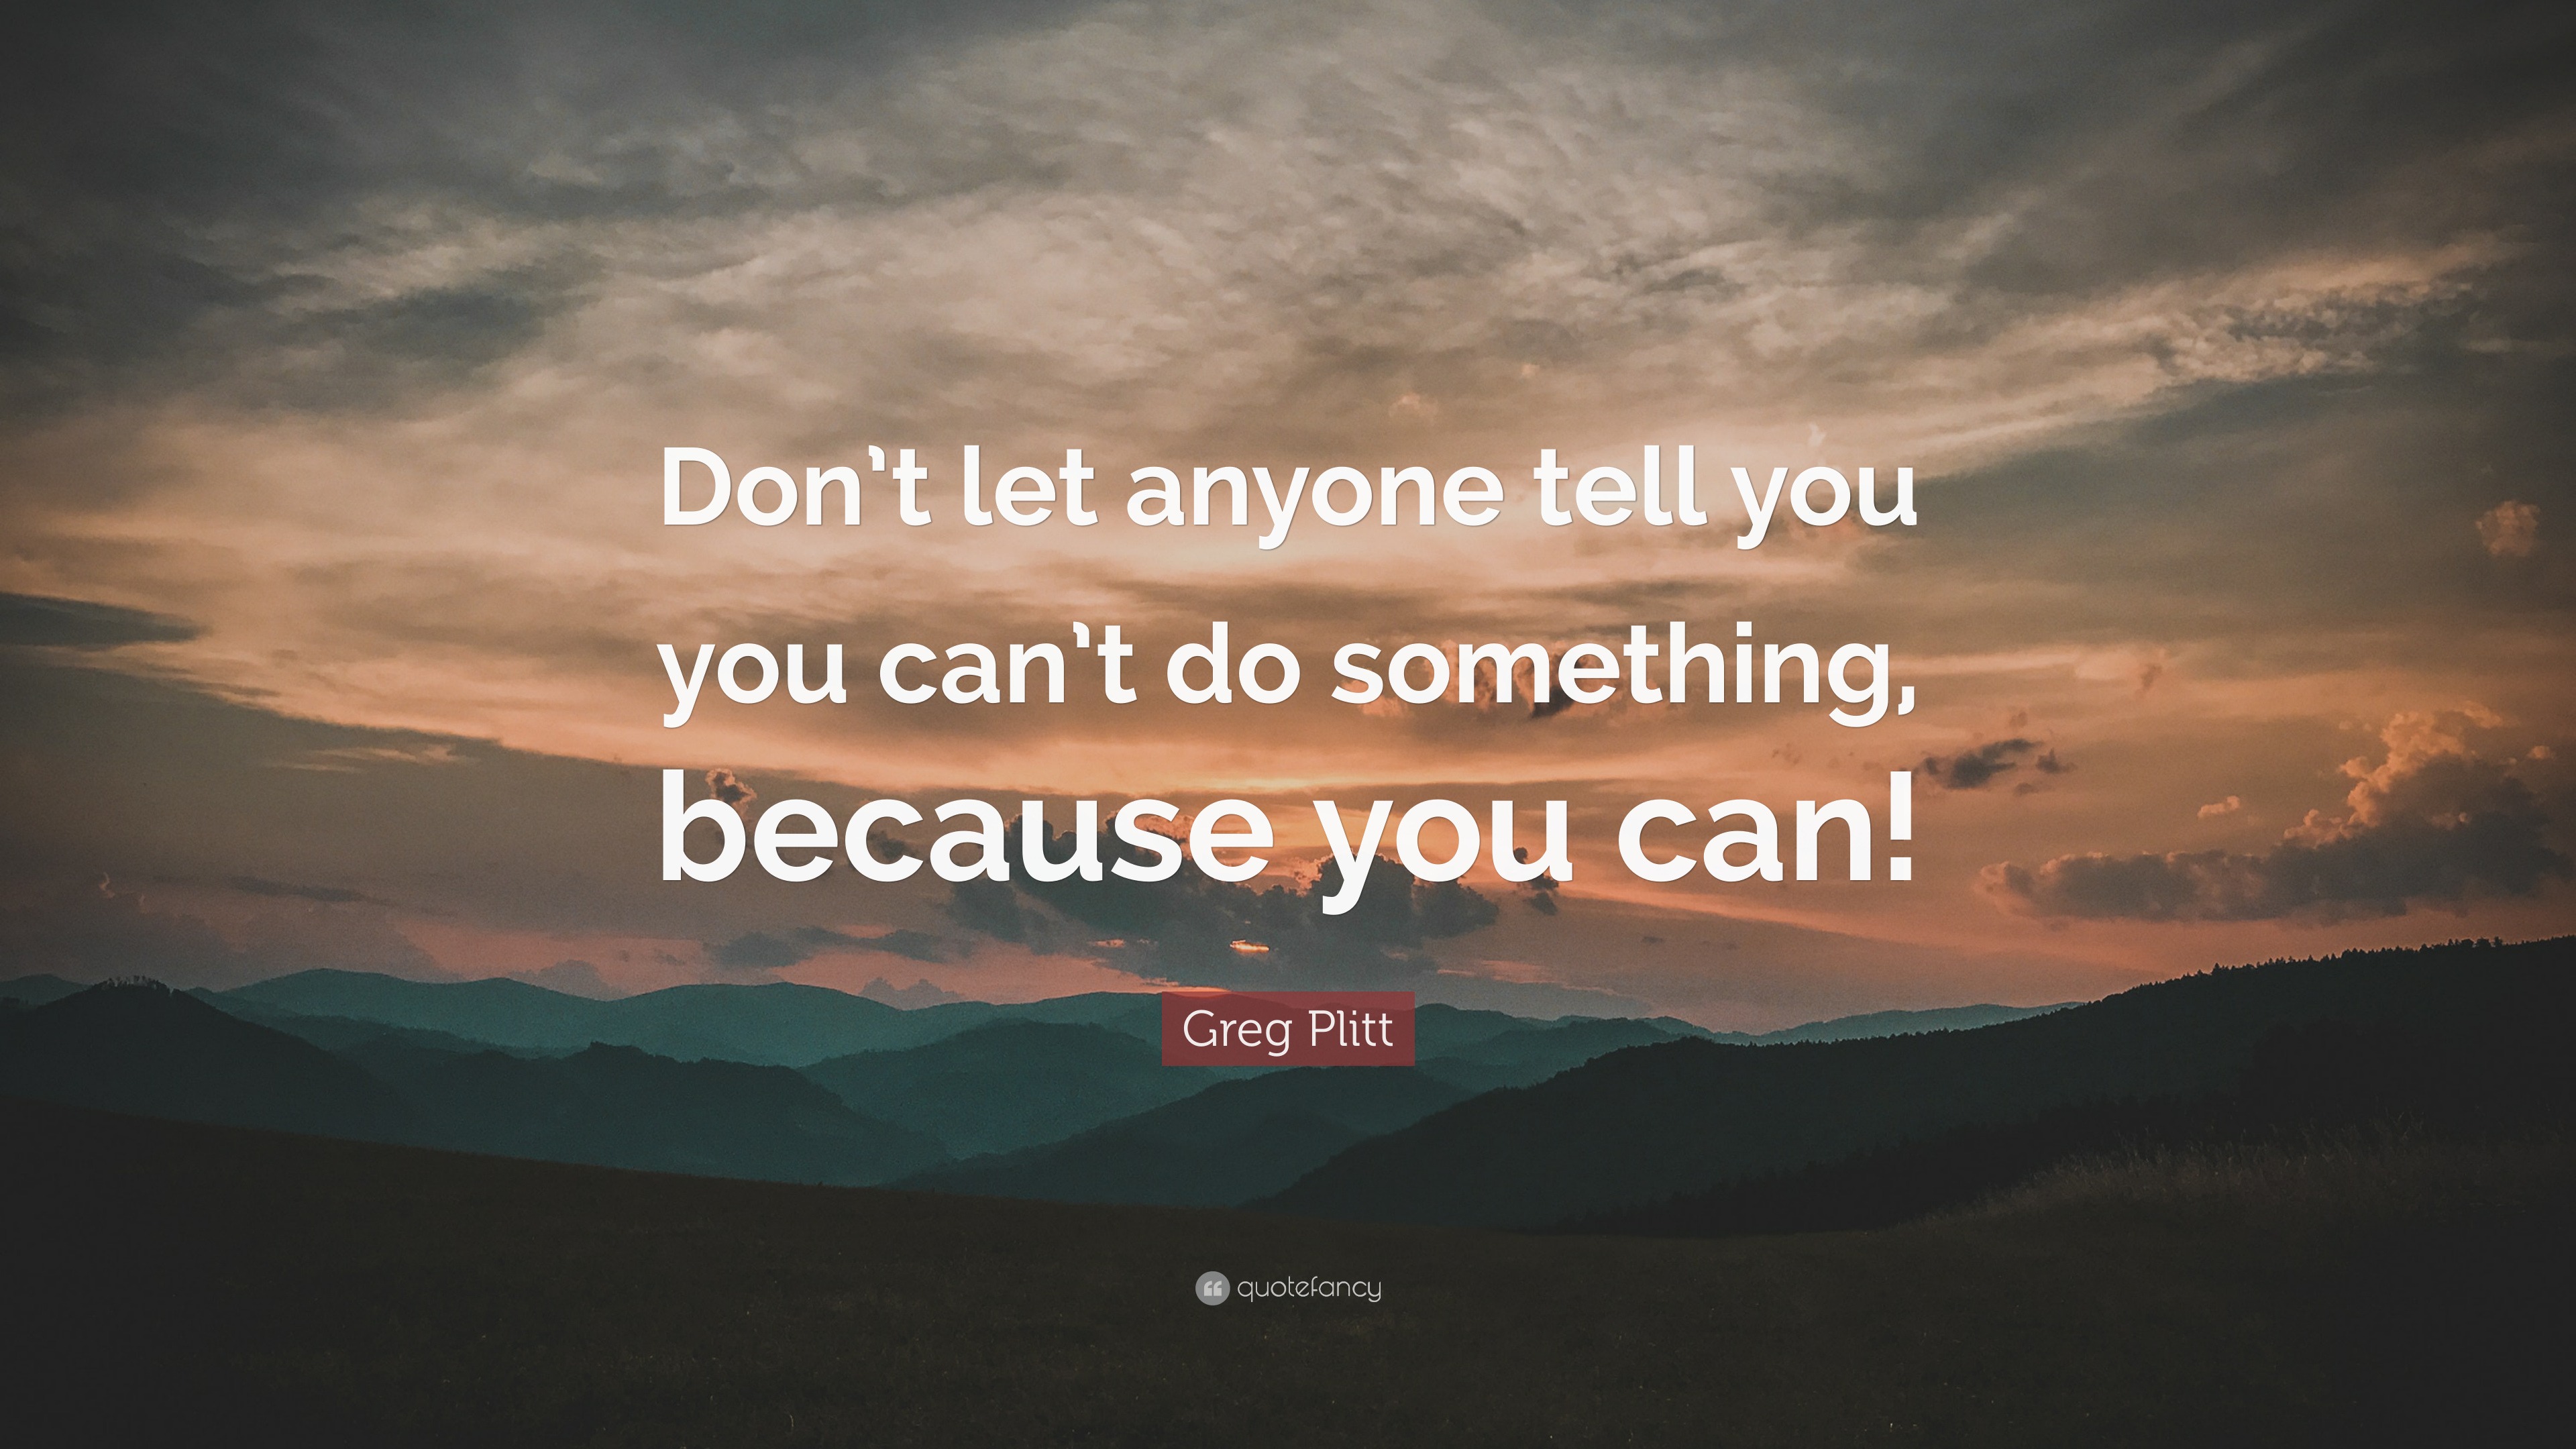 Greg Plitt Quote “dont Let Anyone Tell You You Cant Do Something Because You Can” 2176